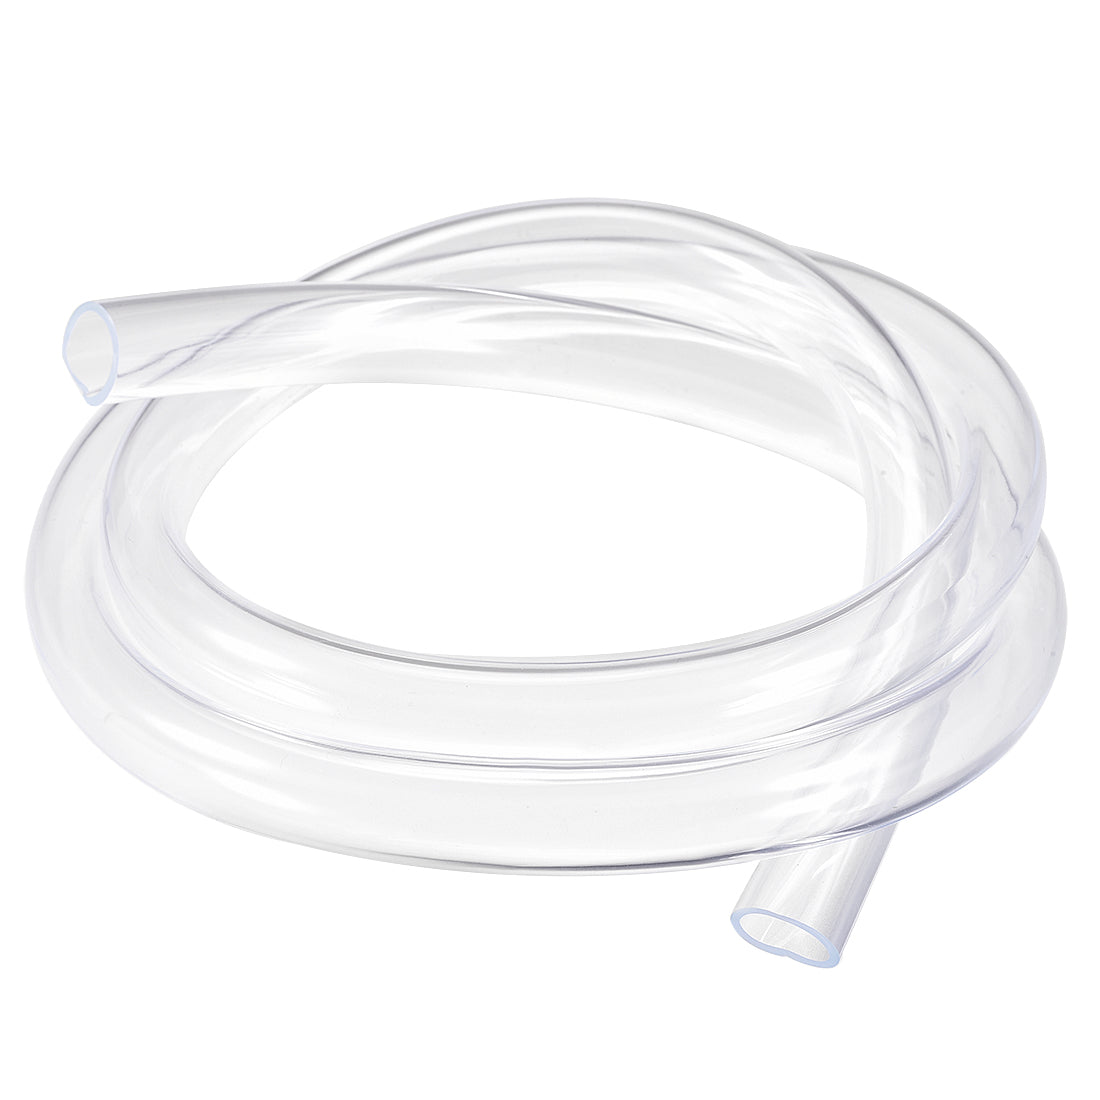 Uxcell Uxcell PVC Hose Tube, 7mm(0.27") ID x 10mm(0.39") OD 1.5m Clear Vinyl Tubing